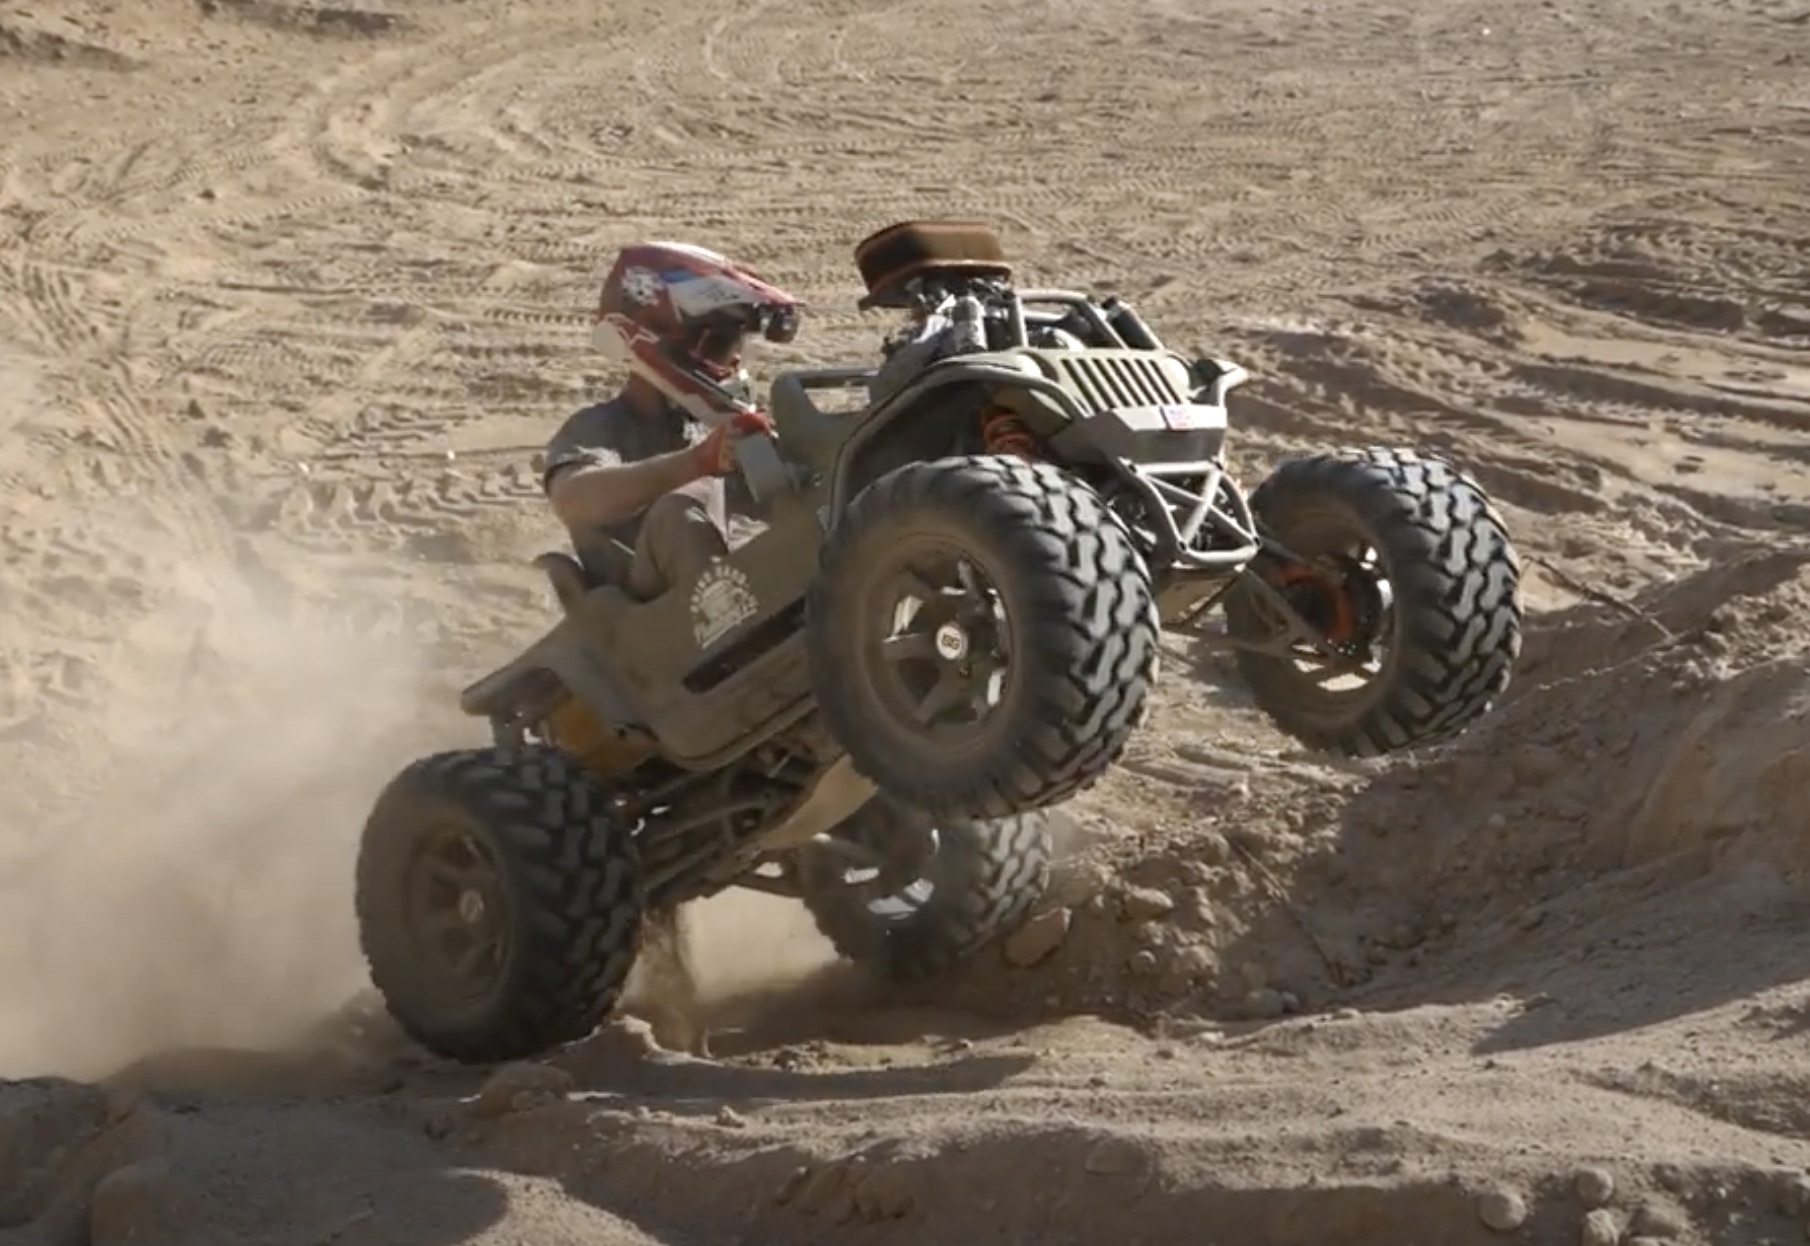 Christmas List Item #1: The 100 Horsepower Power Wheels Jeep In Action!